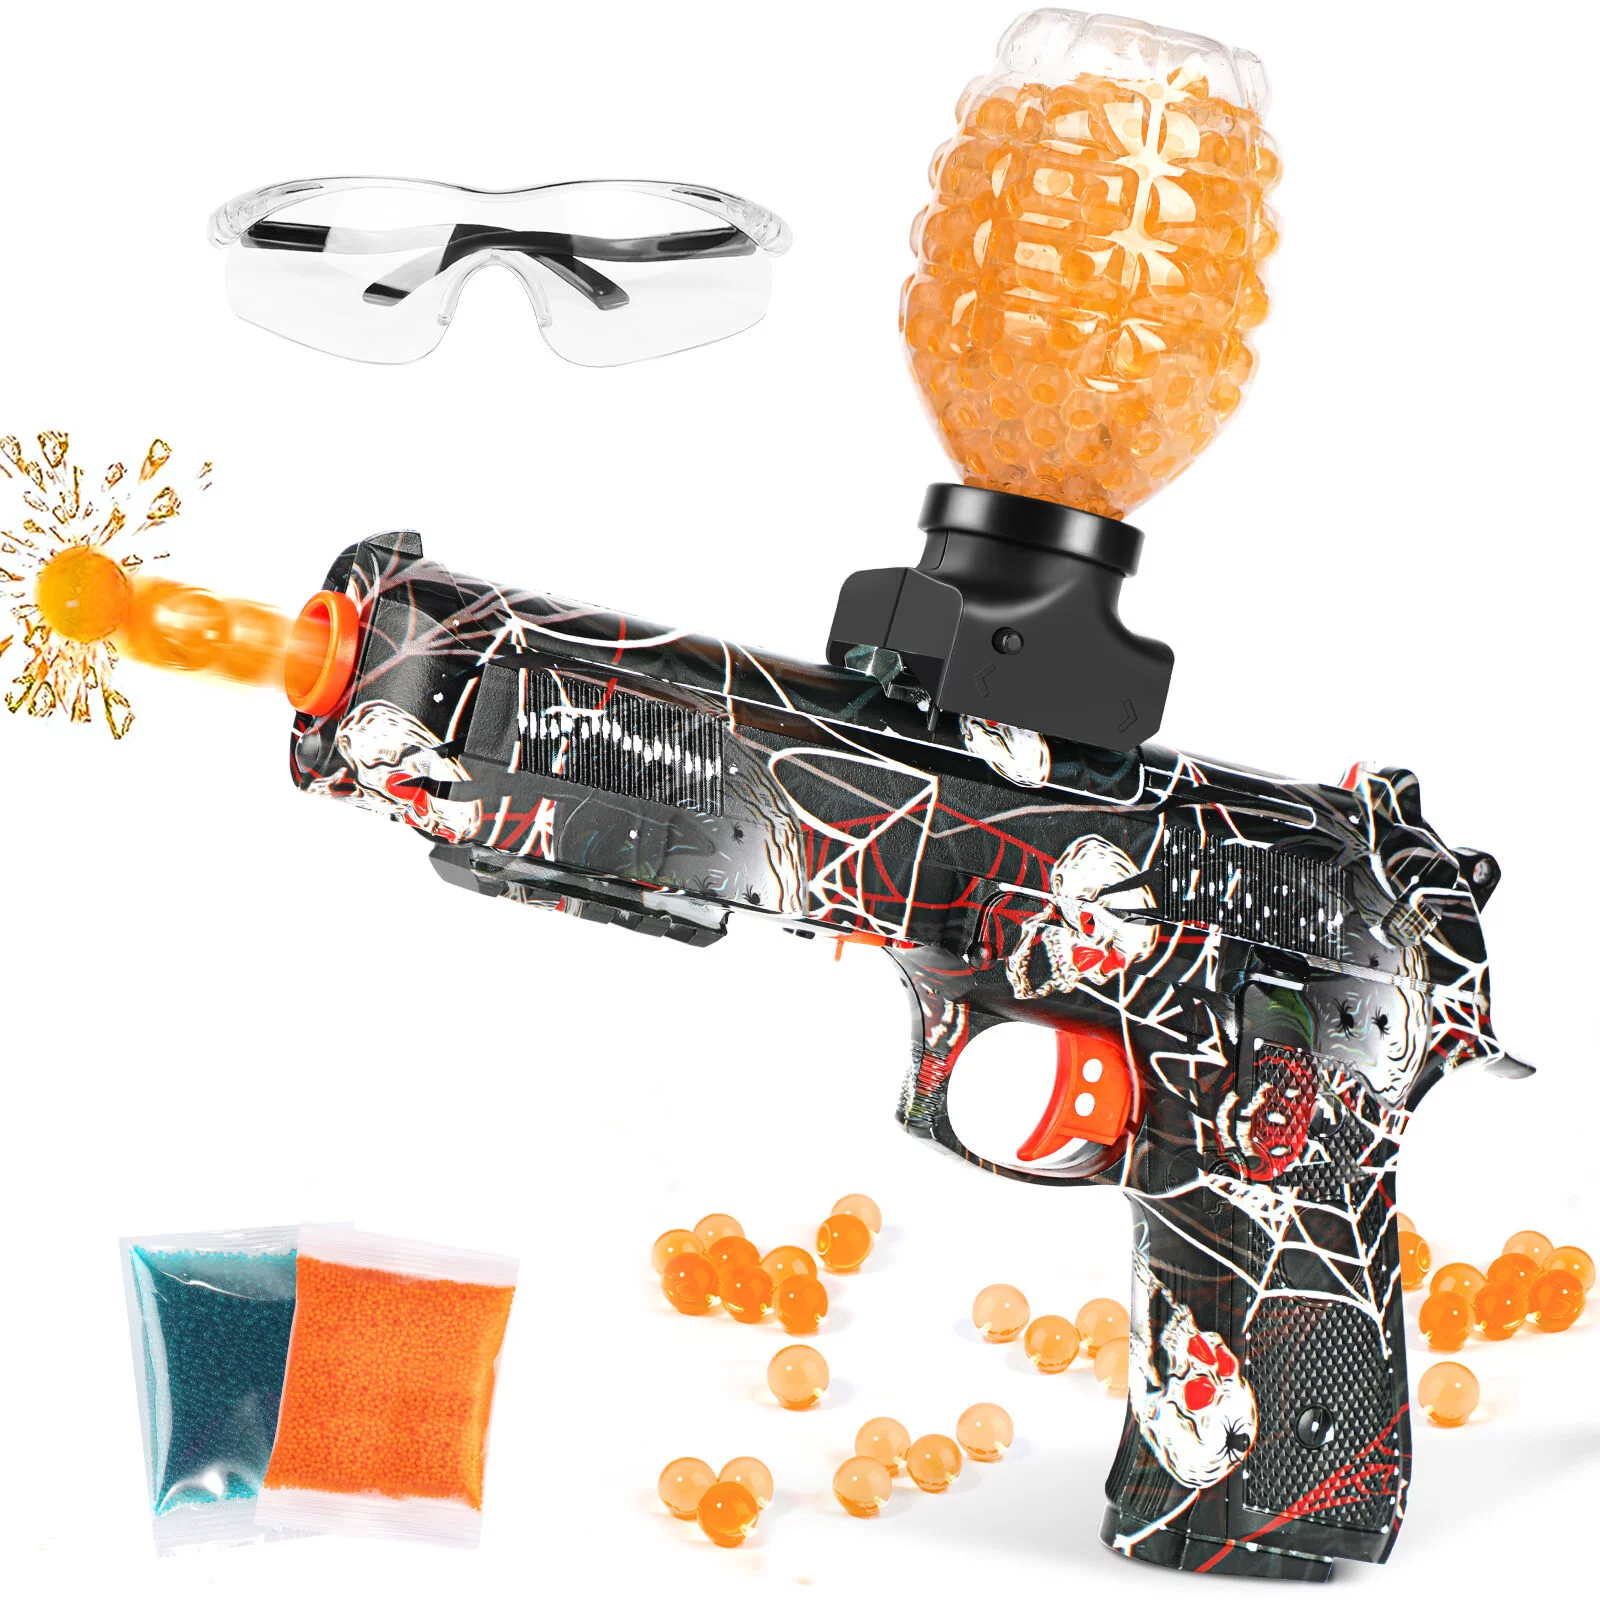 Purchase Fascinating Orbeez Gun at Cheap Prices 